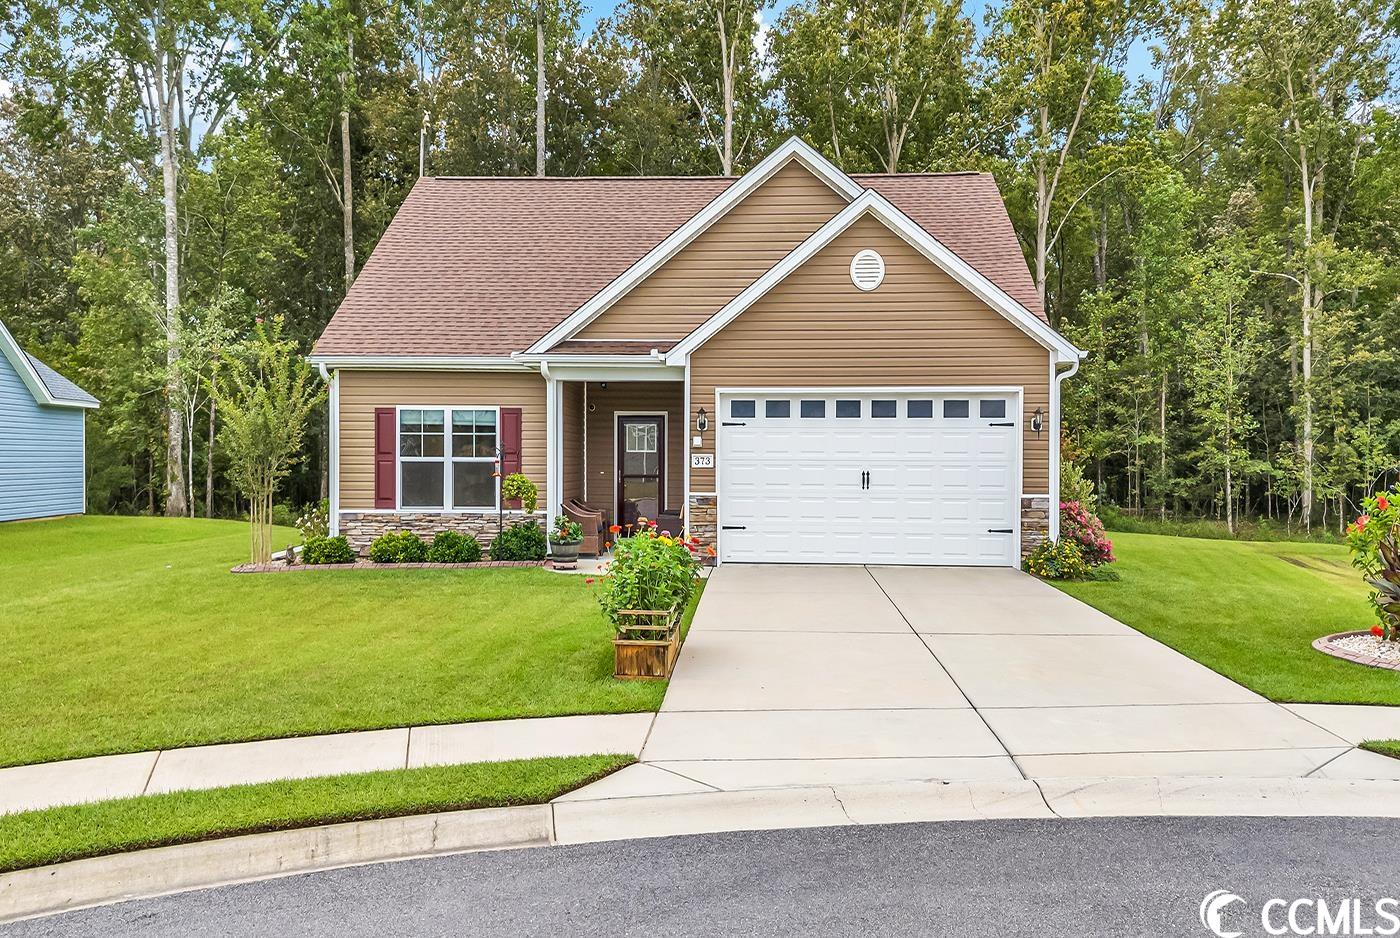 373 Shallow Cove Dr. Conway, SC 29527